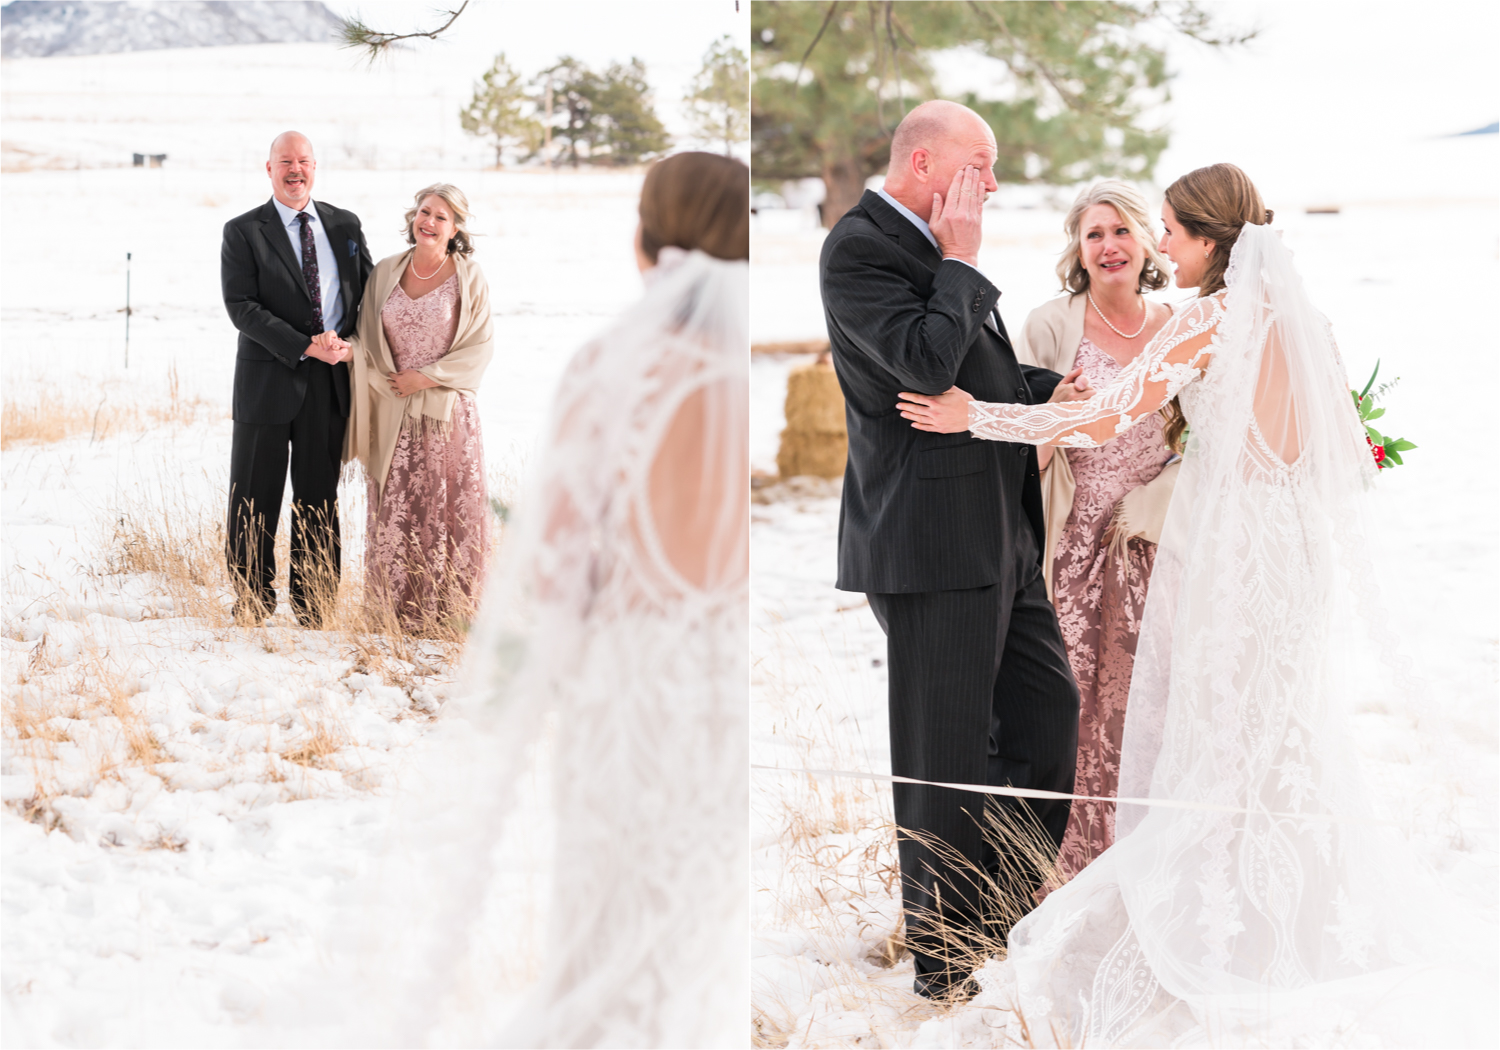 Winter Wonderland Wedding in Colorado Springs | Britni Girard Photography Colorado Wedding Photography and Film Team | Snow covered mountains and Christmas just a few days away | Annika + John's Nostalgic Winter Wedding | Bride's Dress iDream Bridal Essence of Australia | Air Force Academy | Daddy Daughter First Look